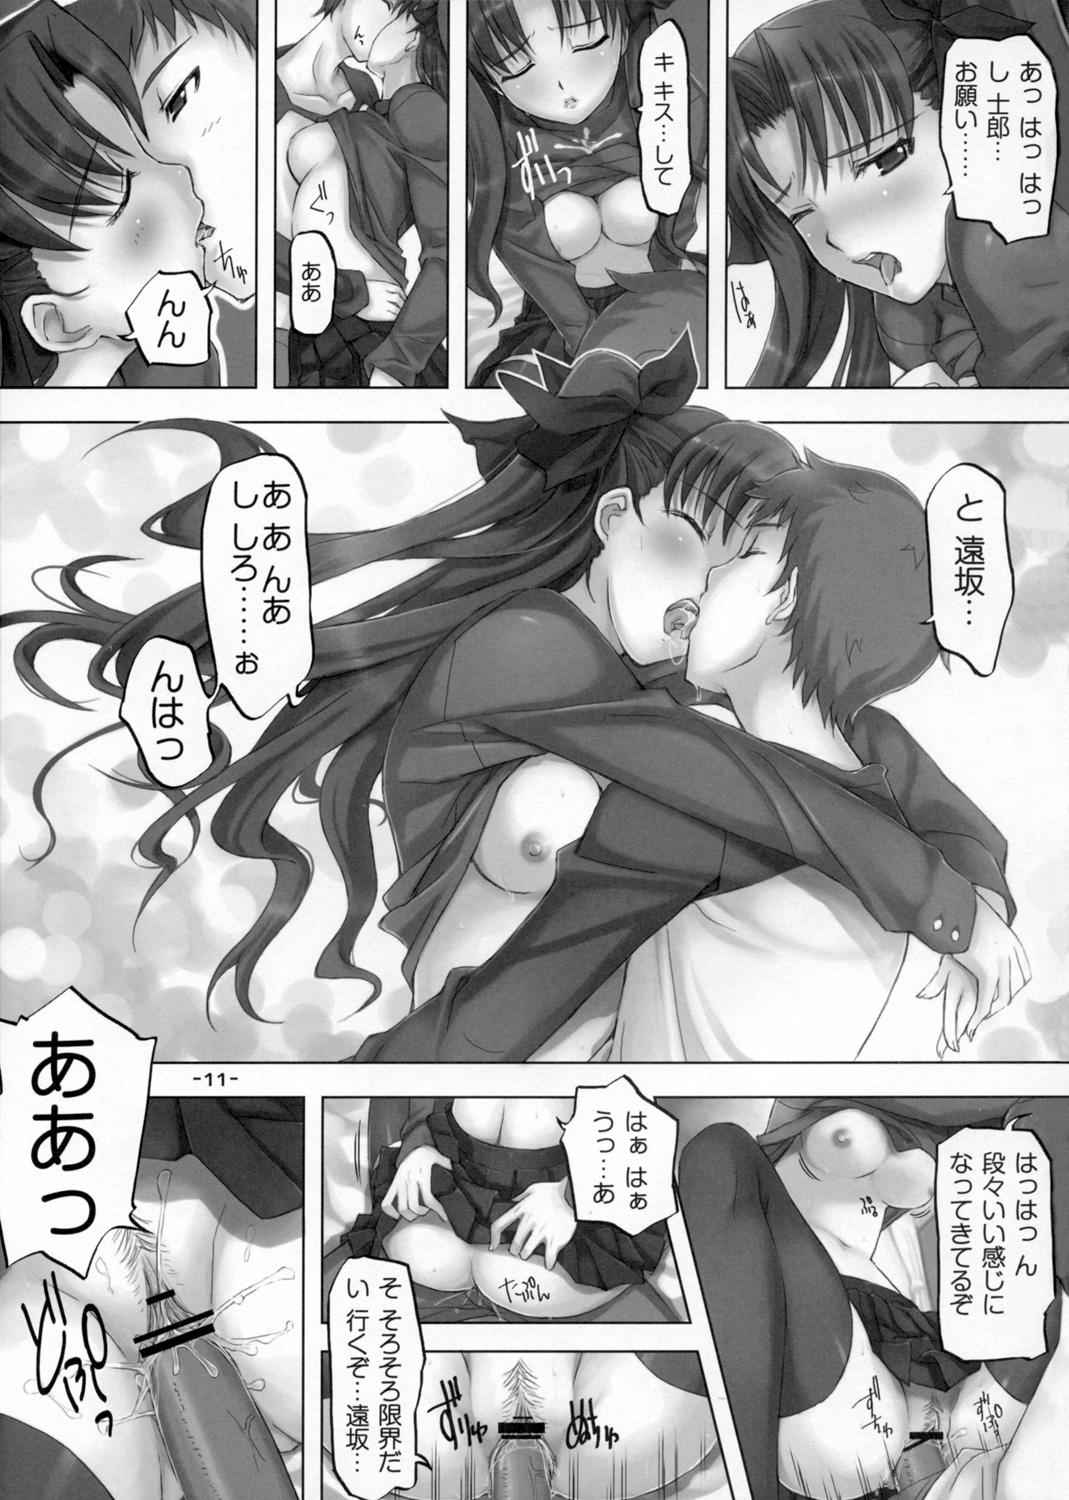 HD DAILY LIFE - Fate stay night Fate hollow ataraxia Blows - Page 10